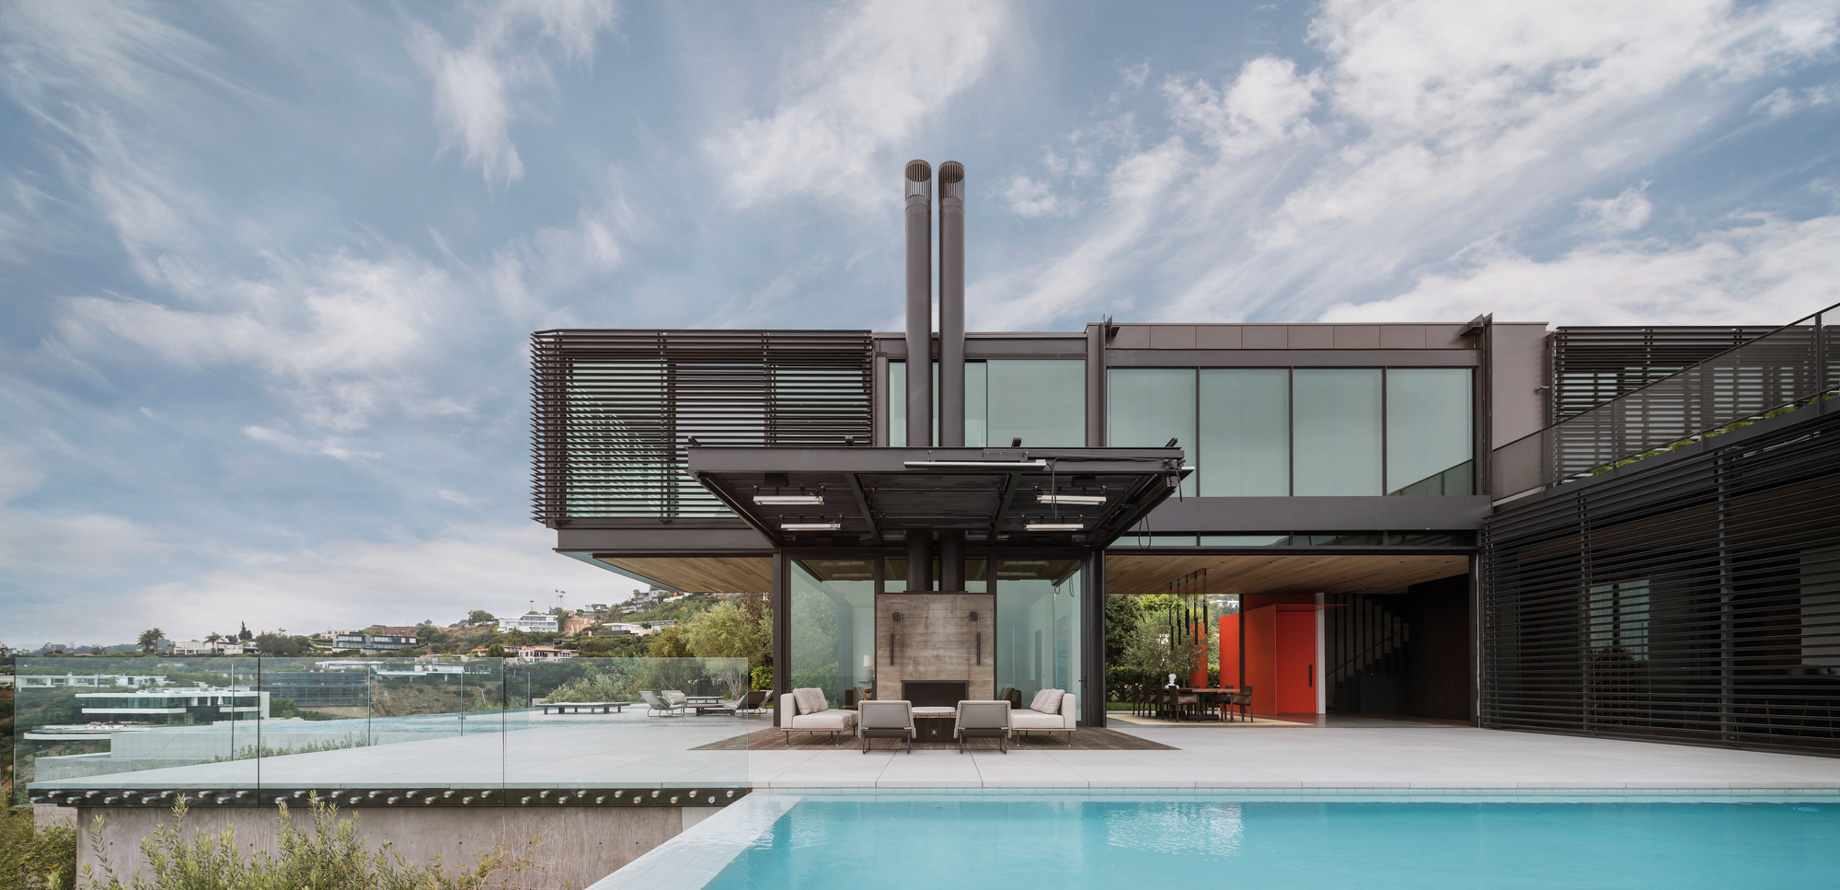 Collywood House – 1301 Collingwood Pl, Los Angeles, CA, USA – West Hollywood Modern Contemporary Home